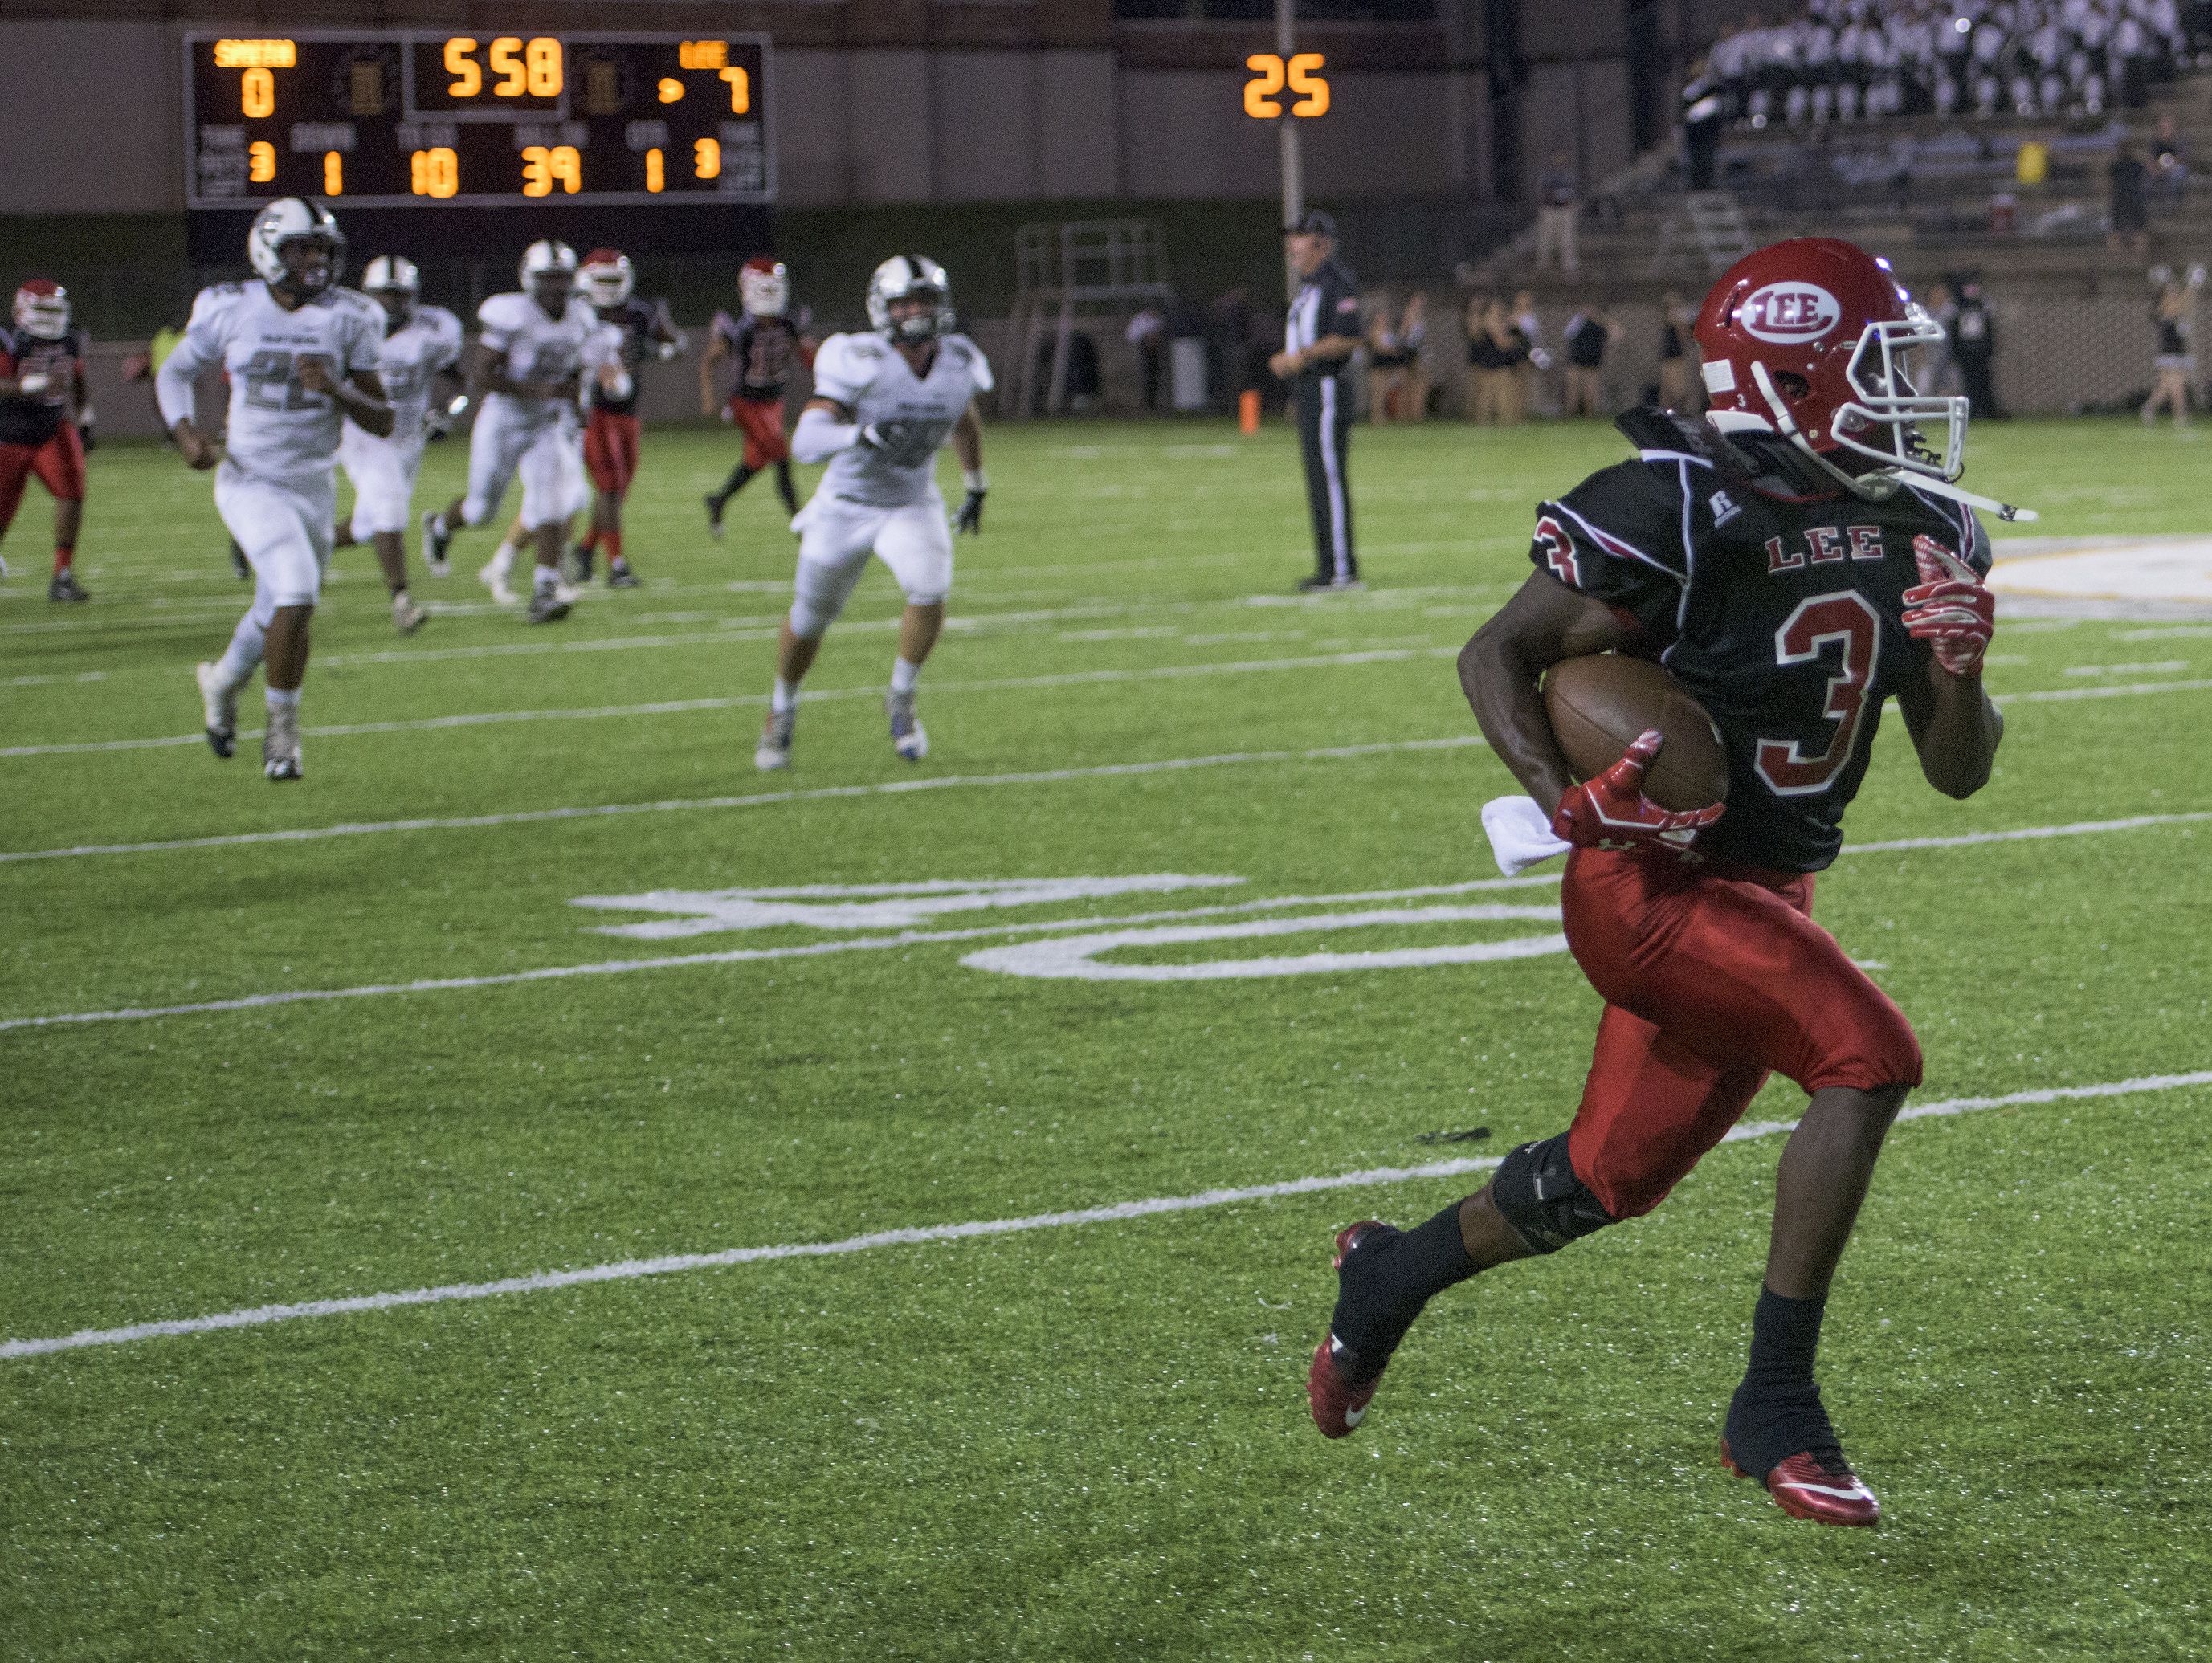 Lee's Kaniaus Johnson breaks free for a long first half touchdown against Smith's Station at Cramton Bowl in Montgomery, Ala., on Thursday September 8, 2016.